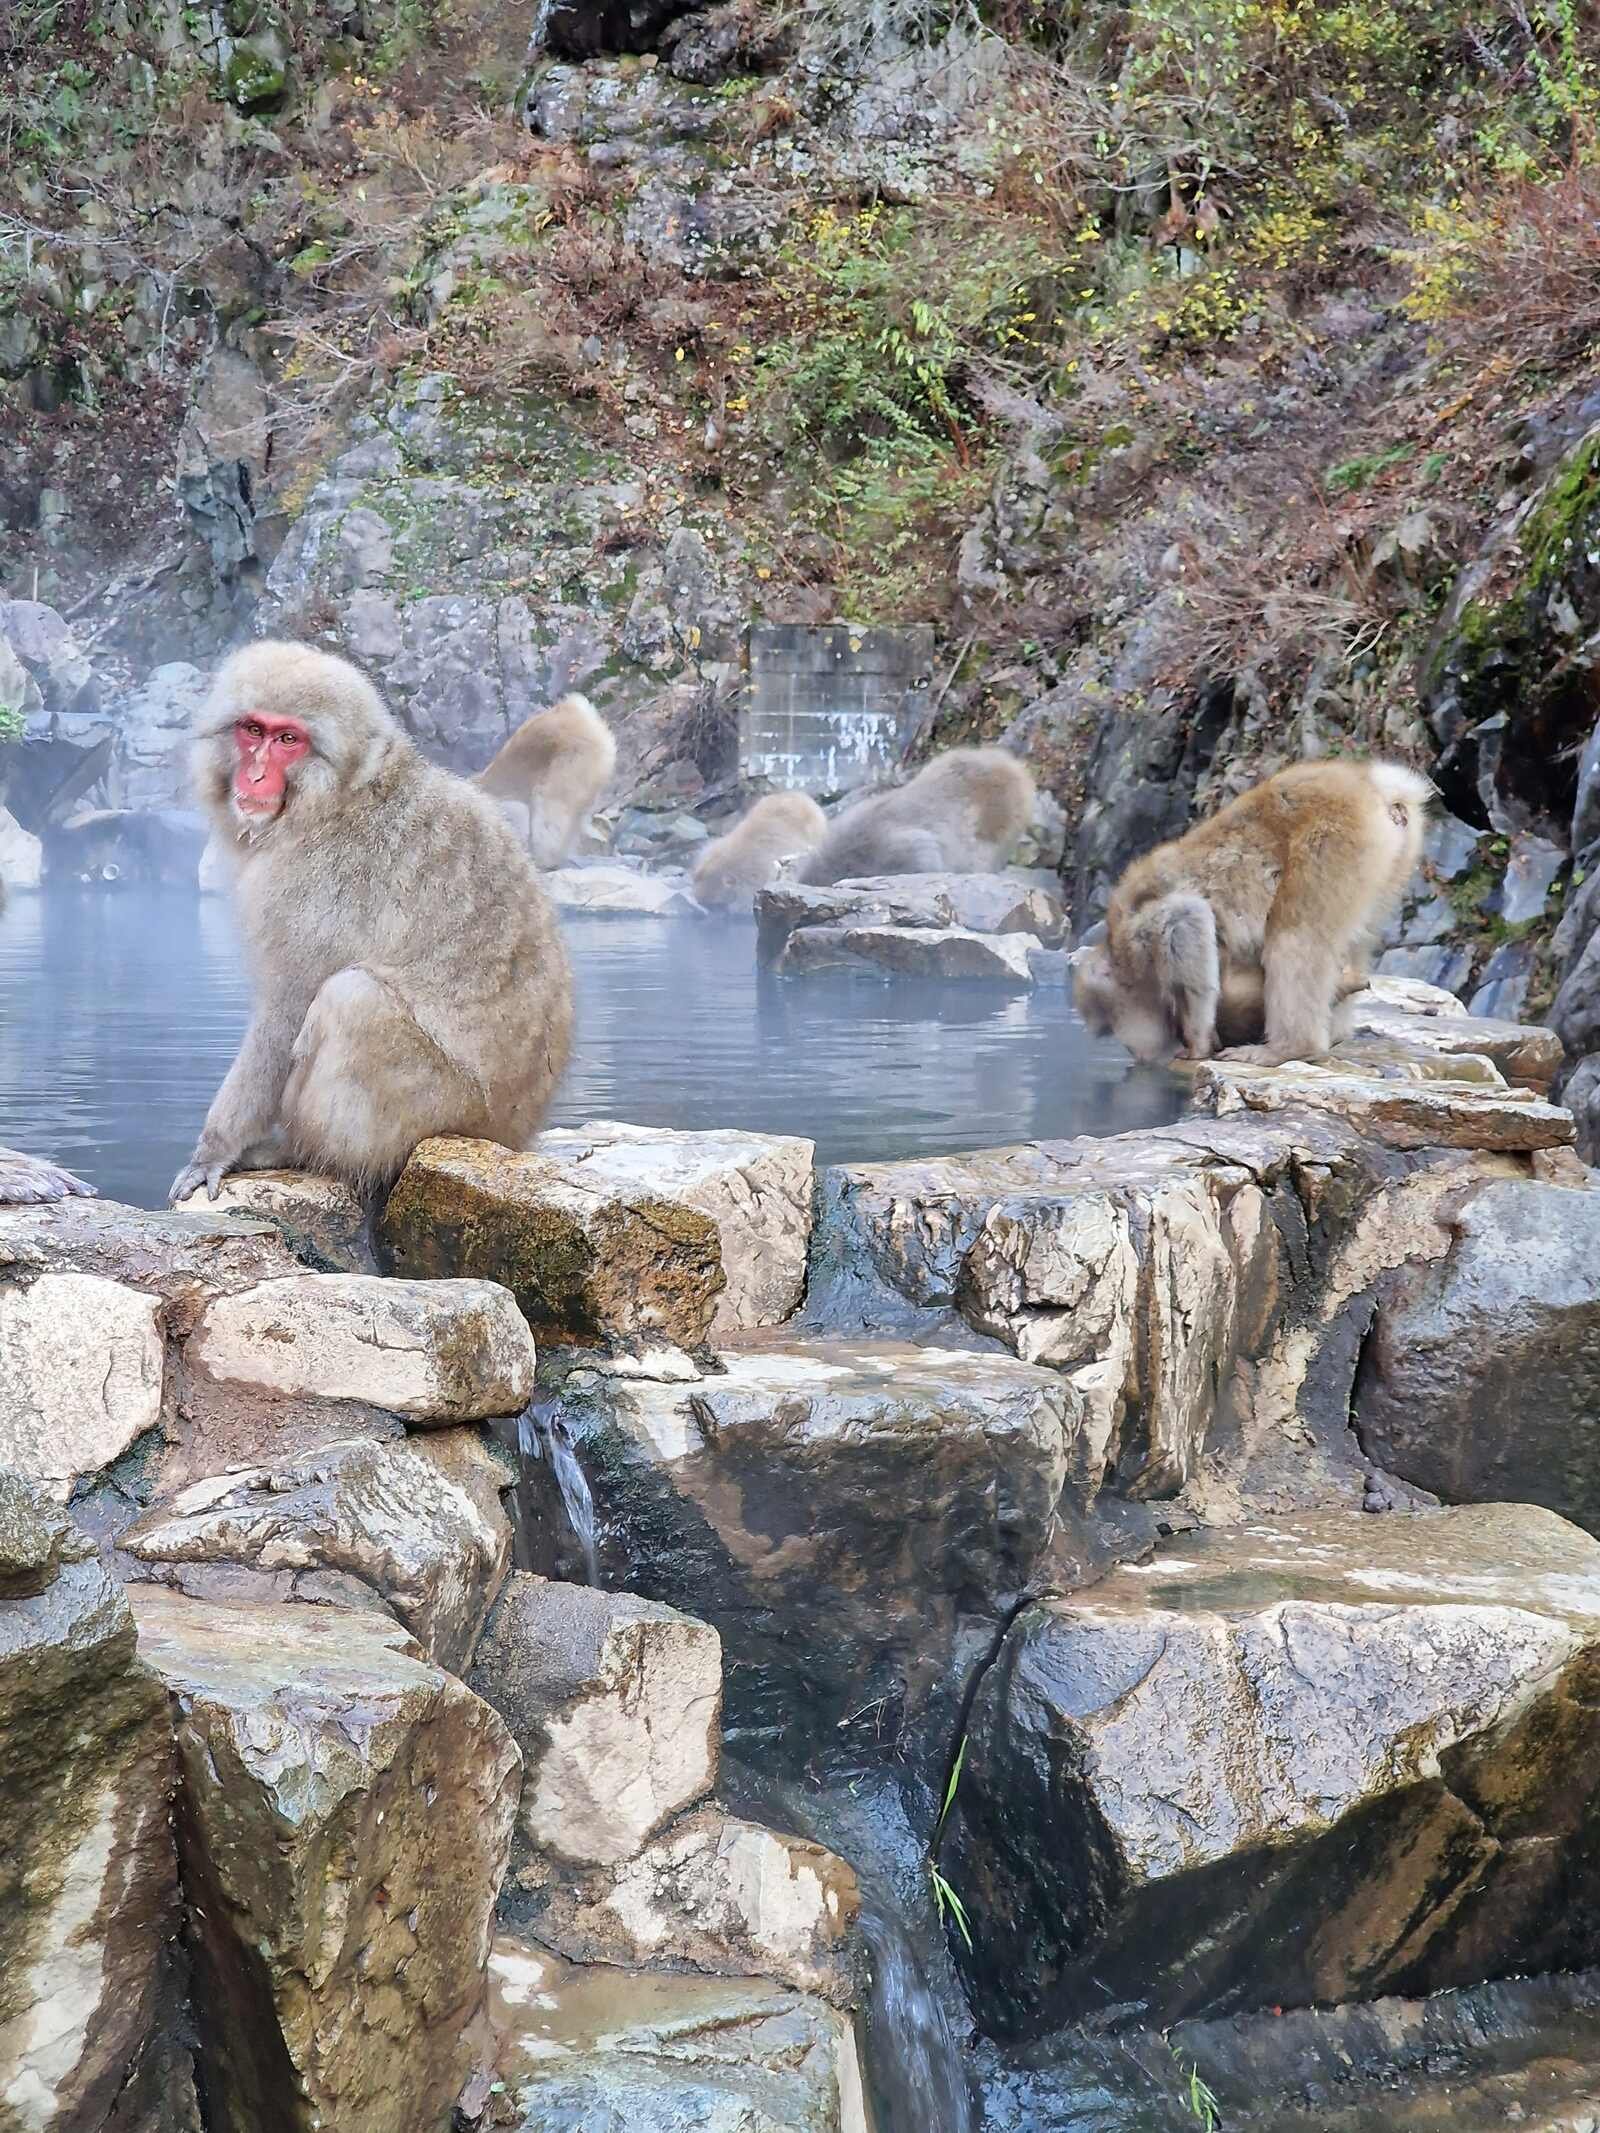 a hot spring pool surrounded by rocks with dozens of fluffy Japanese snow monkeys sitting on the rocks or in the pool. Steam rising off the water